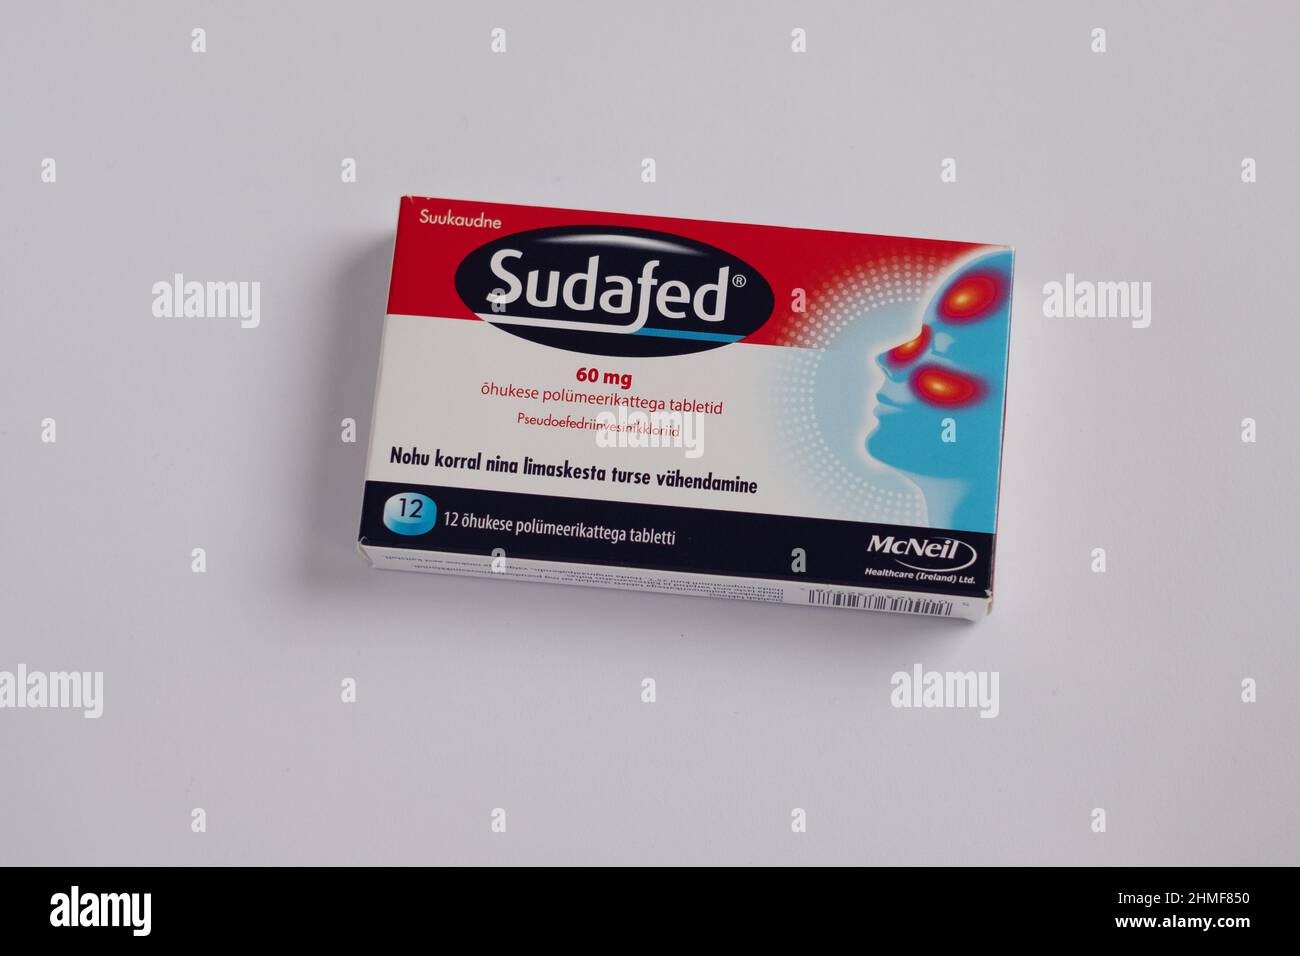 Tallinn, Estonia - 02.08.2022: Sudafed tablets by McNeil Healthcare. Pseudoephedrine nasal decongestant relieves sinus pressure and congestion. Stock Photo